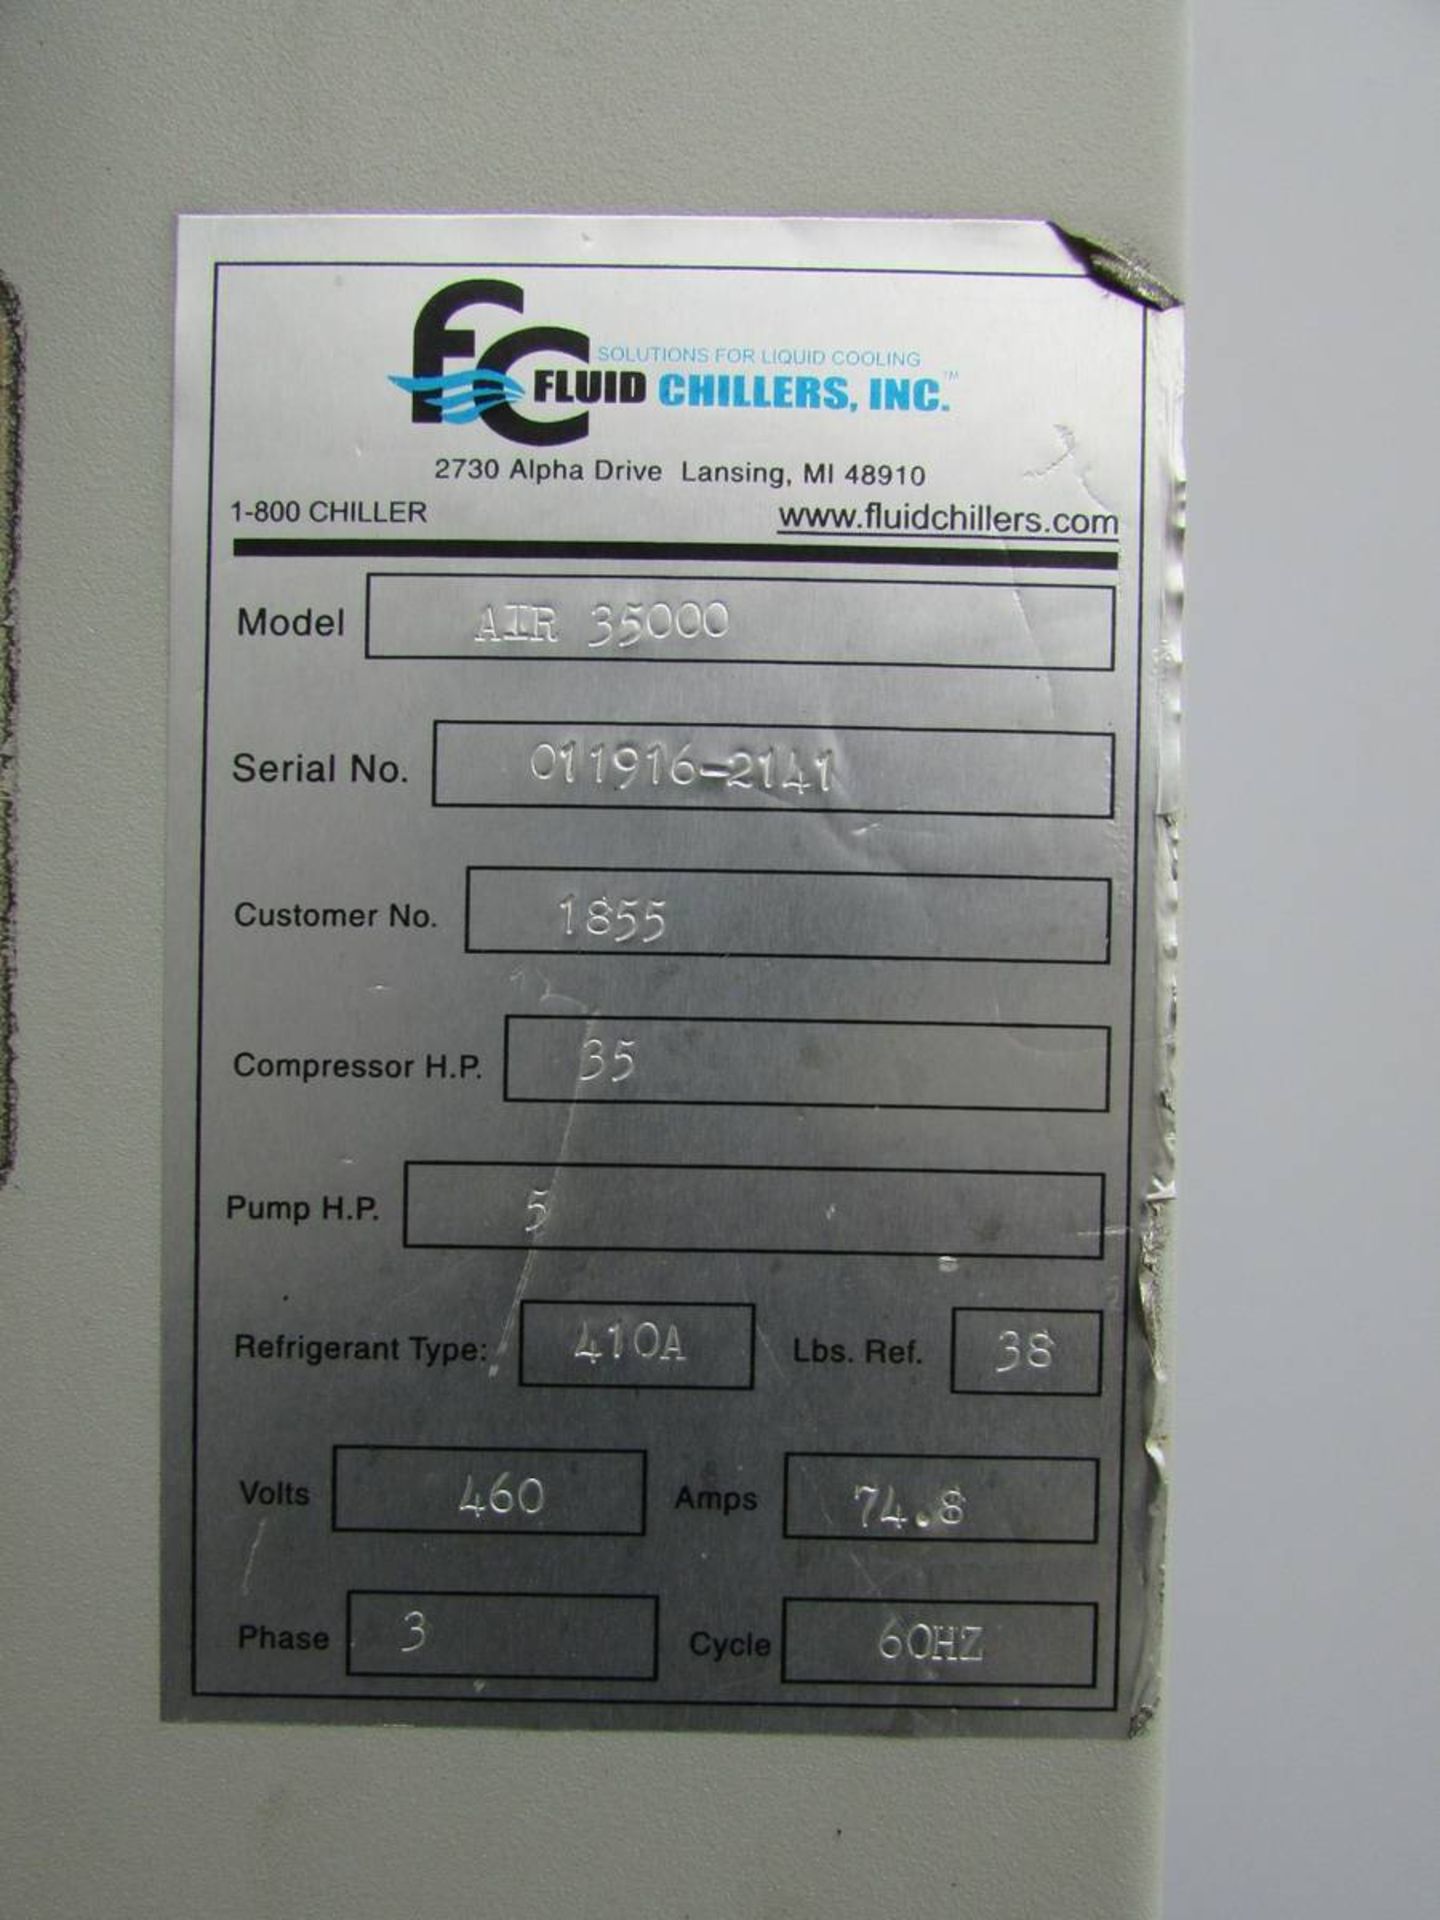 Fluid Chillers Inc AIR 3500 Refrigerated Chiller - Image 7 of 7